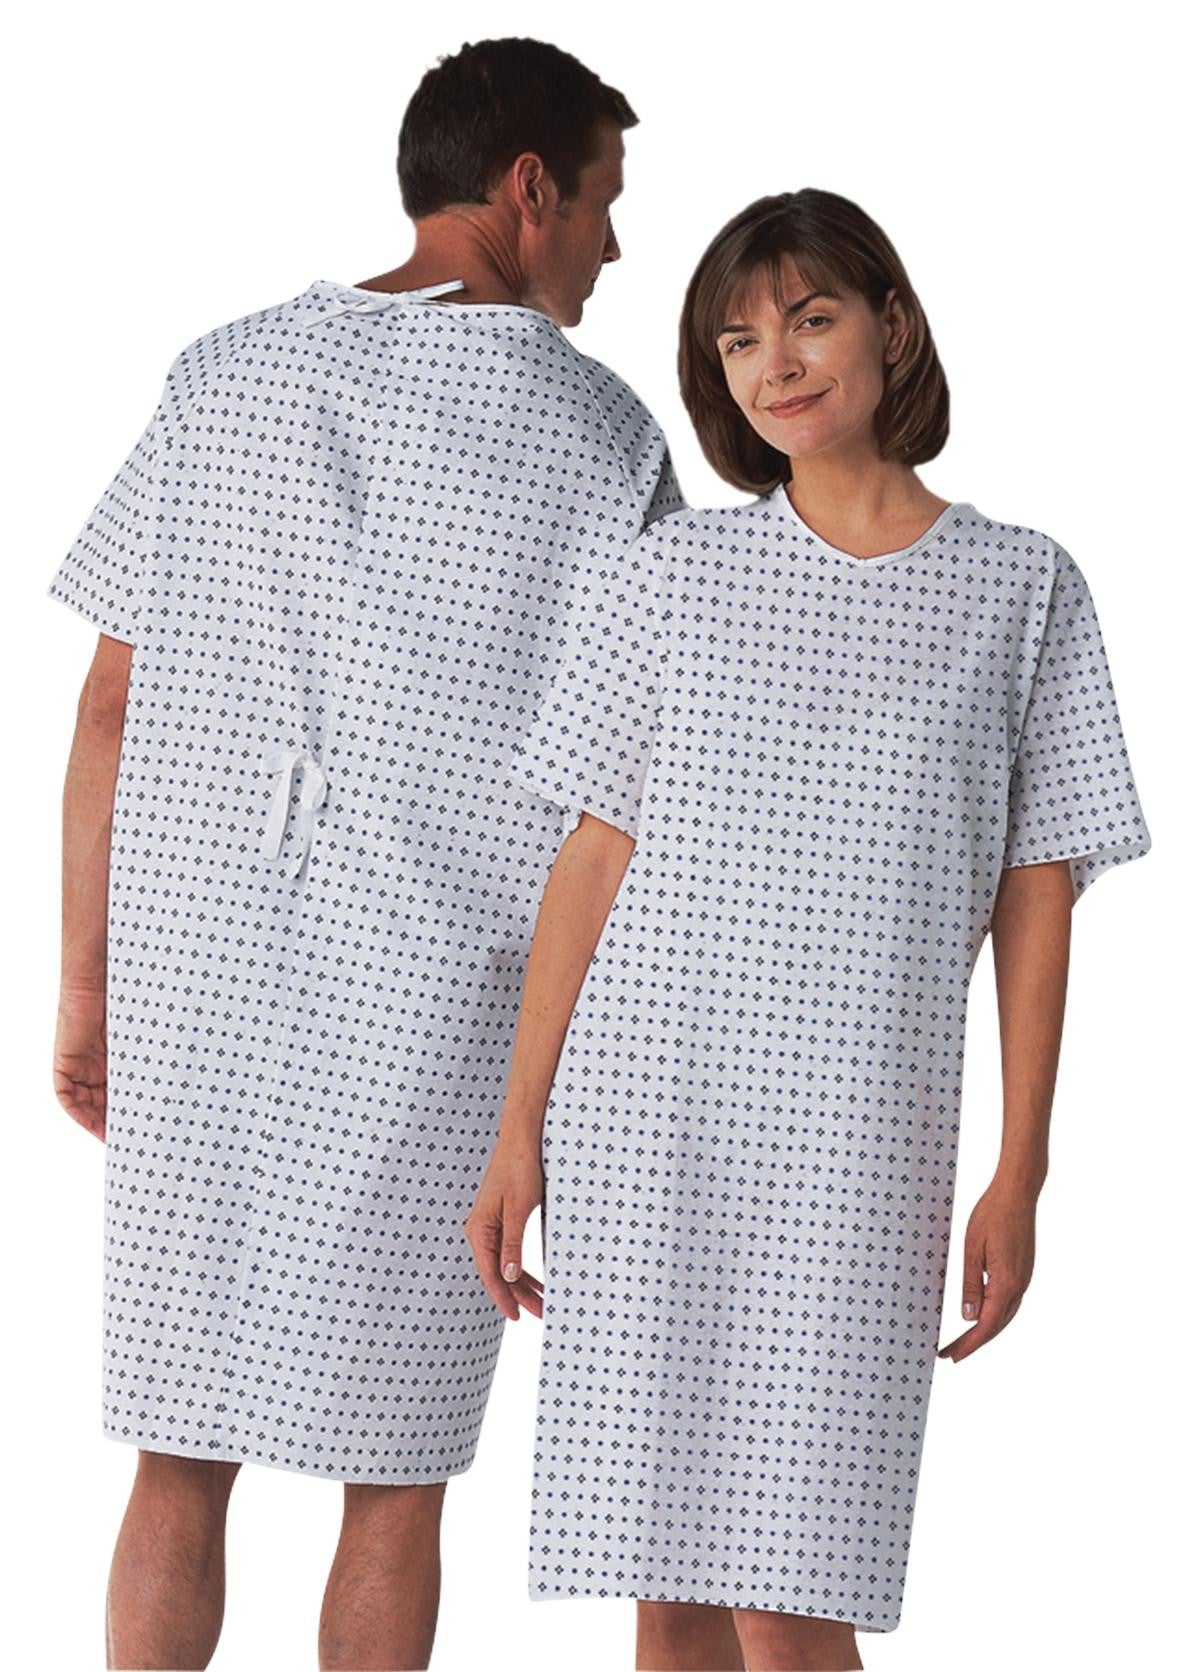 Angelica's hospital gowns and robes set the patient comfort standard for  the healthcare industry. | Hospital gown, Gowns, Fashion